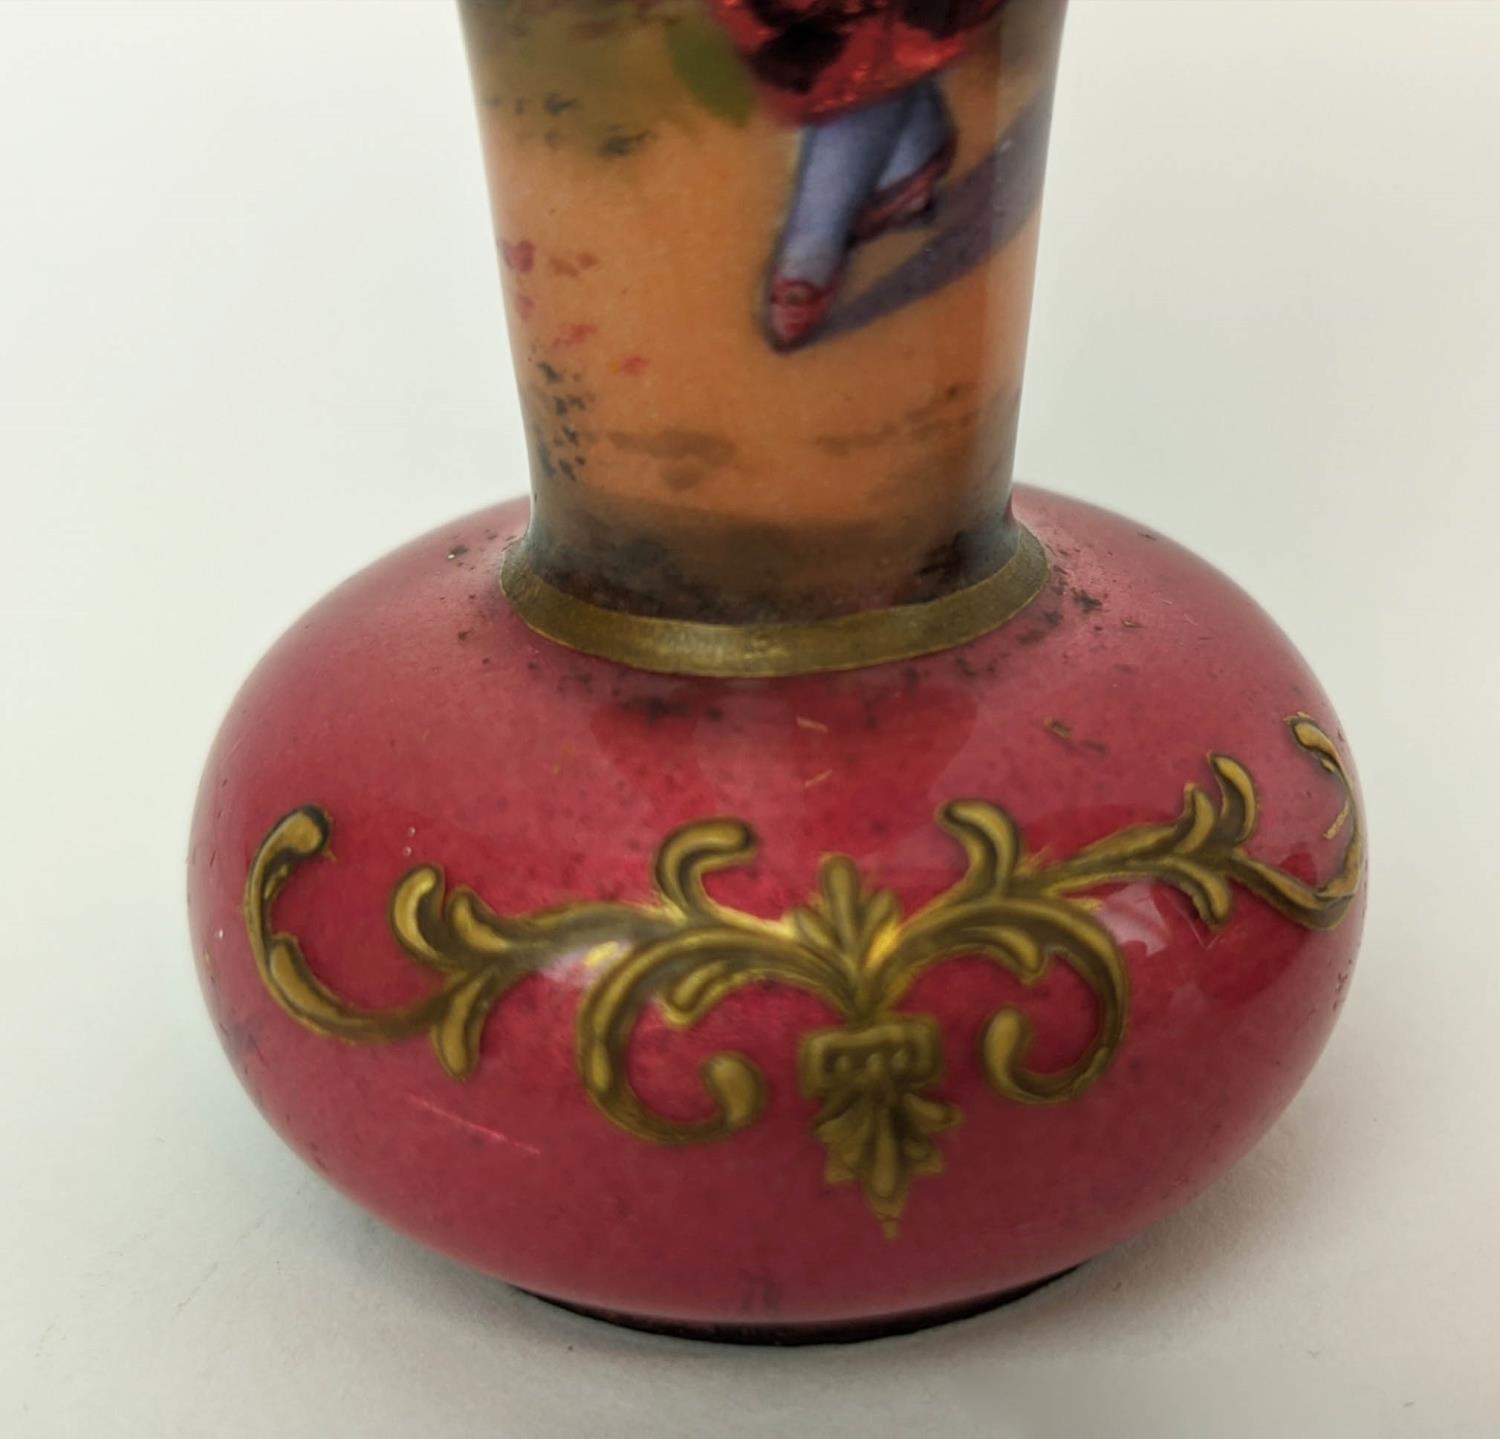 ENAMELLED MINIATURE VASES, a pair, 11cm H one of a Lady, the other of a Gentleman. (2) - Image 7 of 10